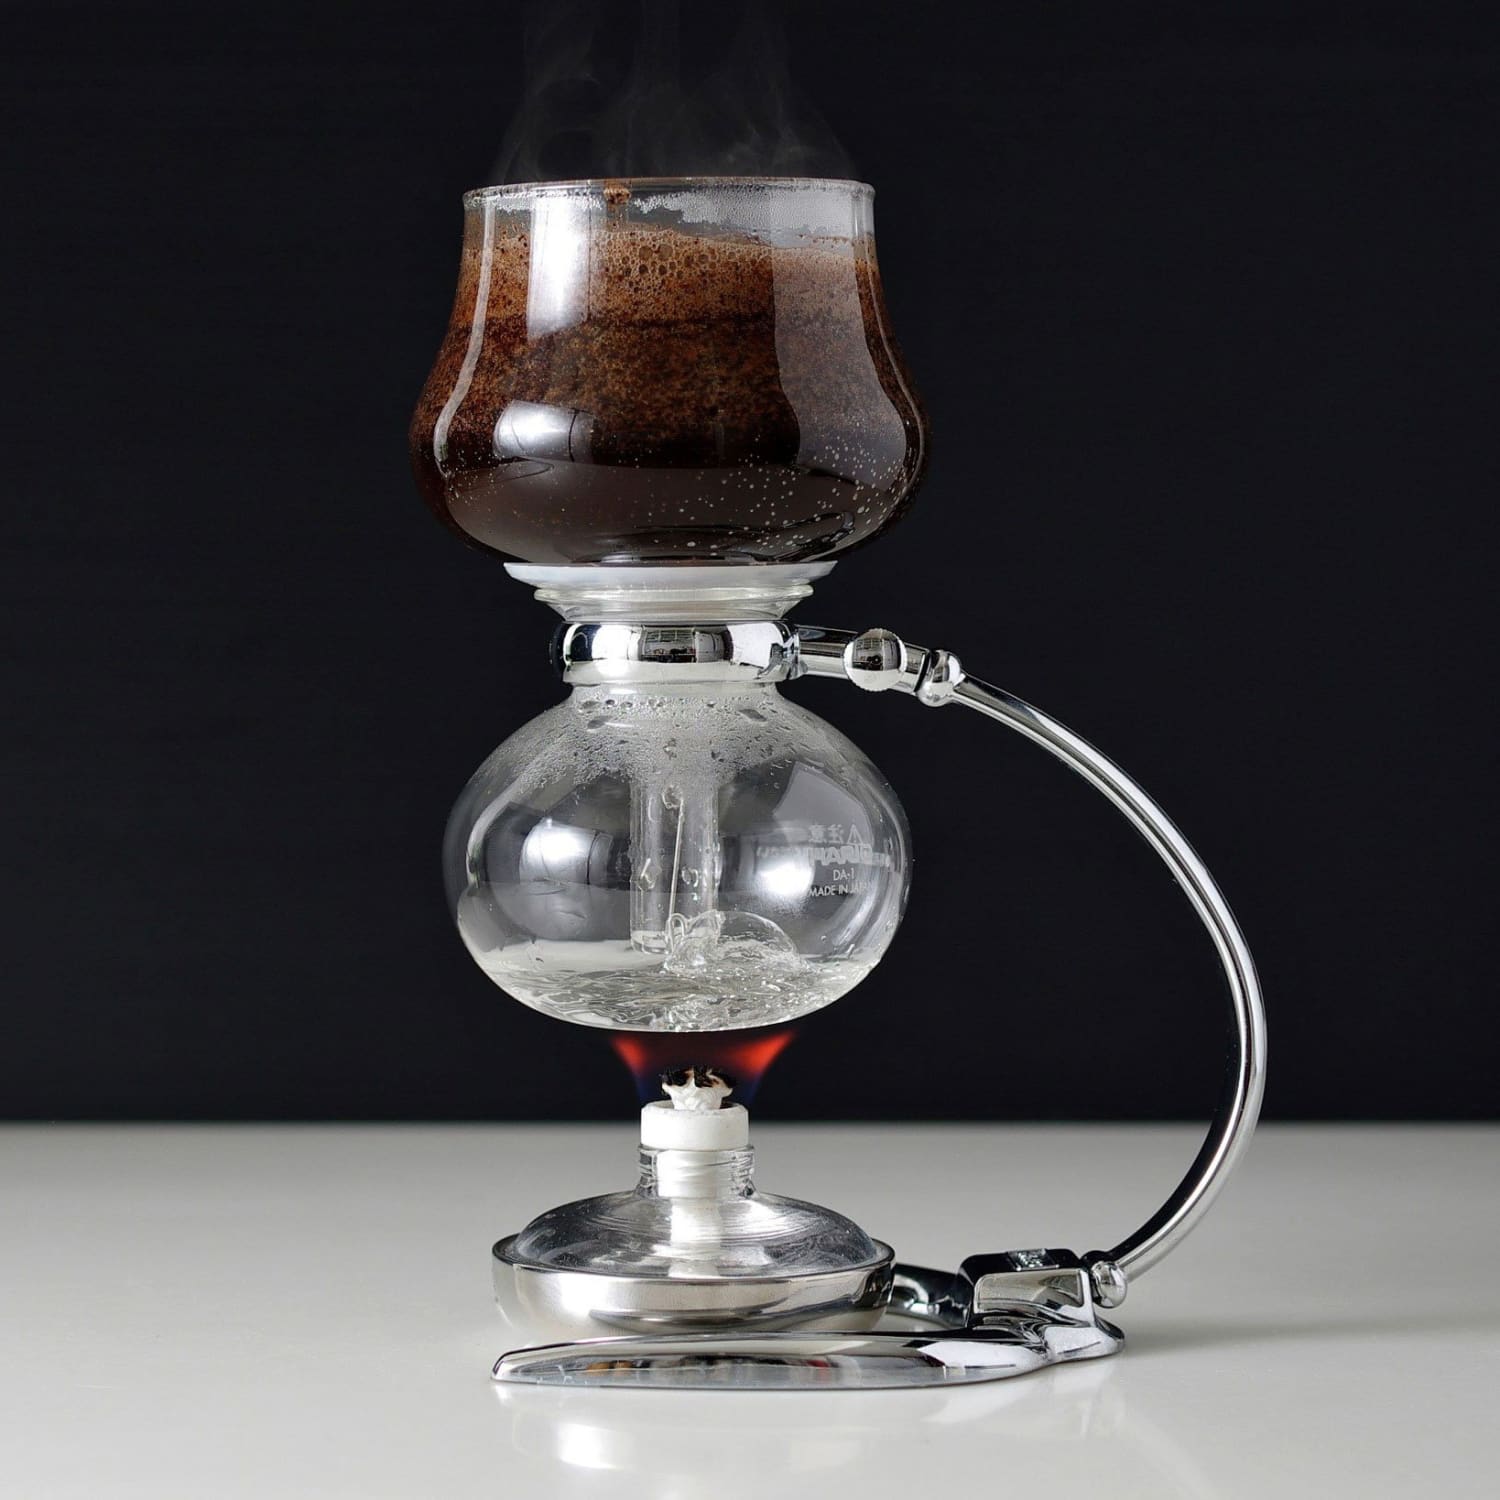 The Syphon Coffee Maker: What You Need To Know